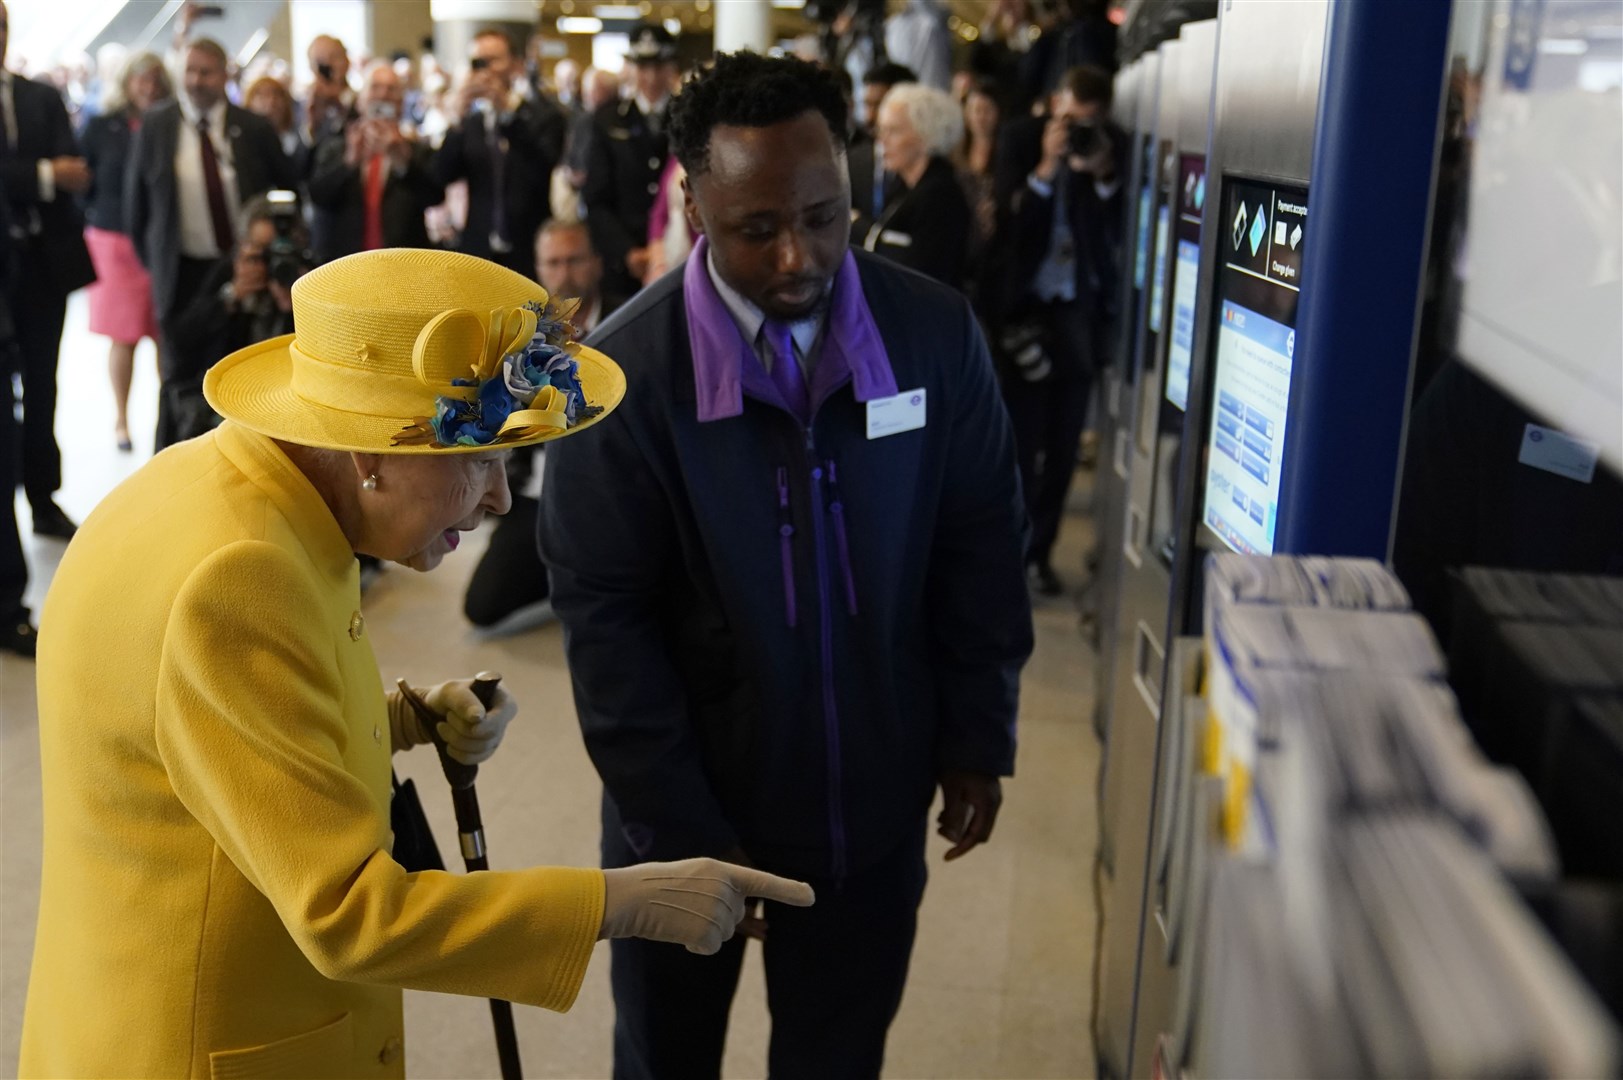 The Queen being shown how to use the oyster card ticket machine works (Andrew Matthews/PA)